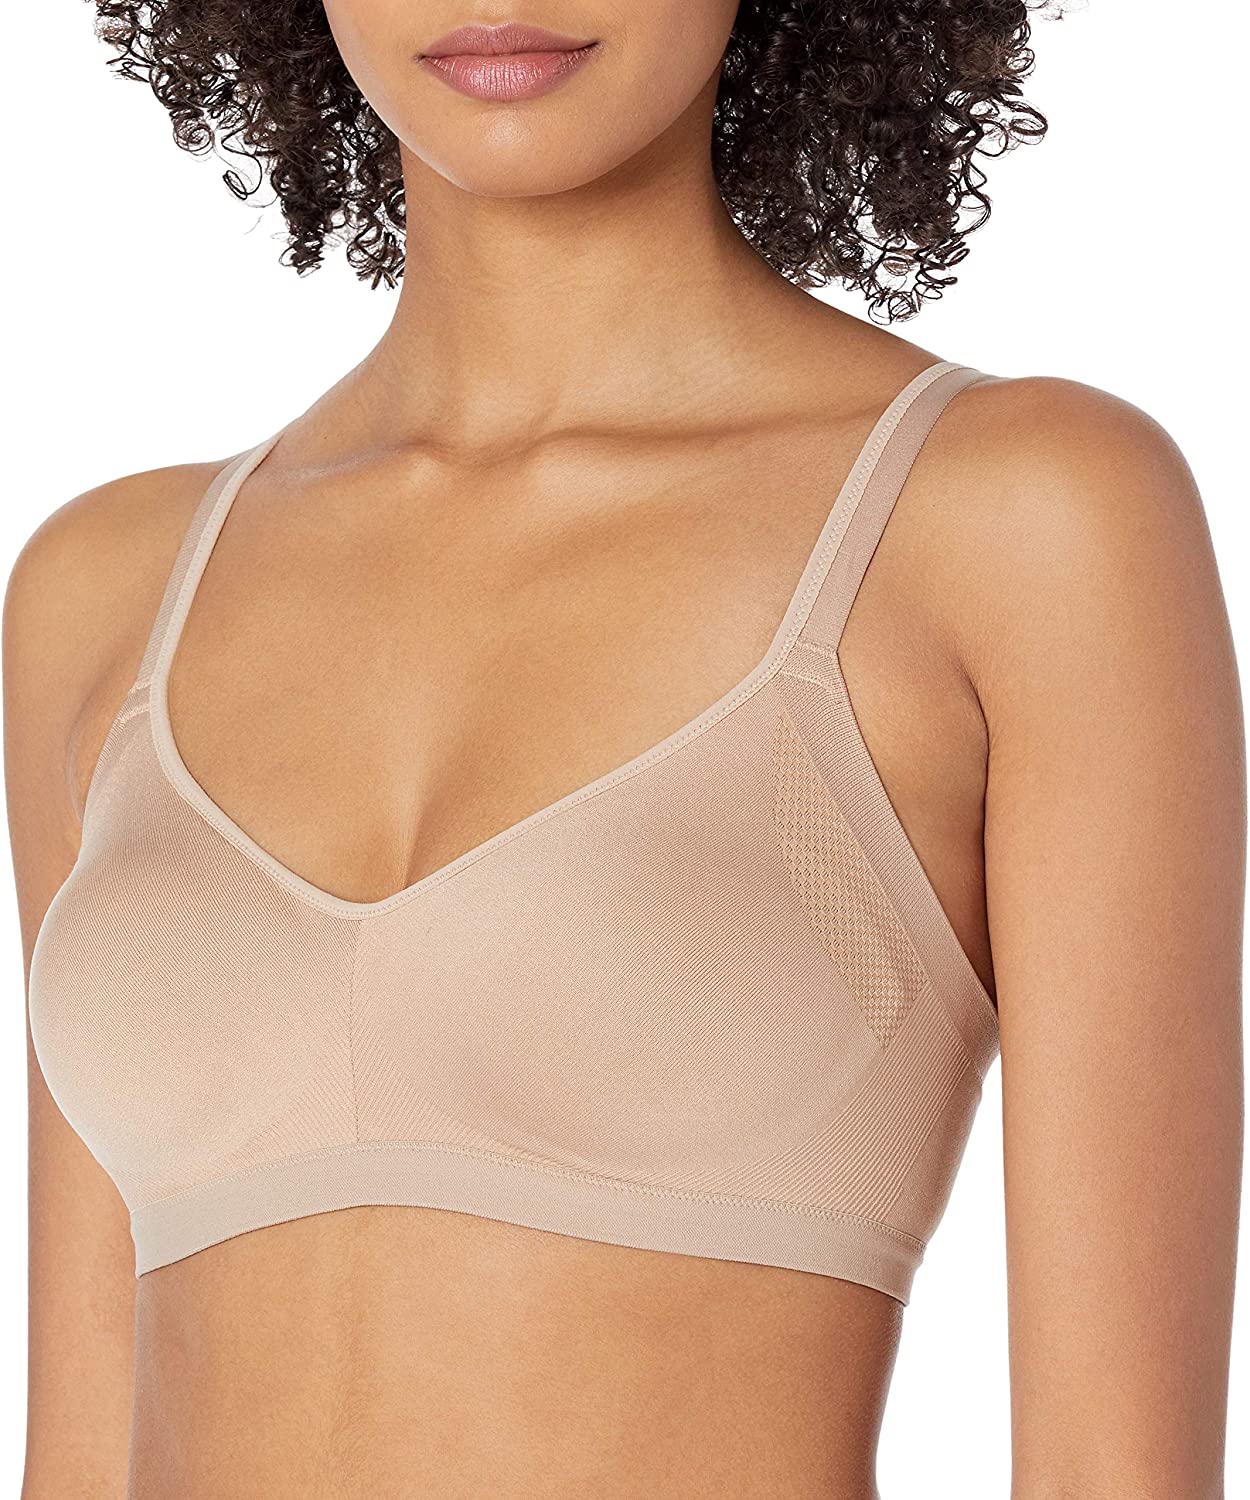 Best Small Bust Bra for Sagging Breasts